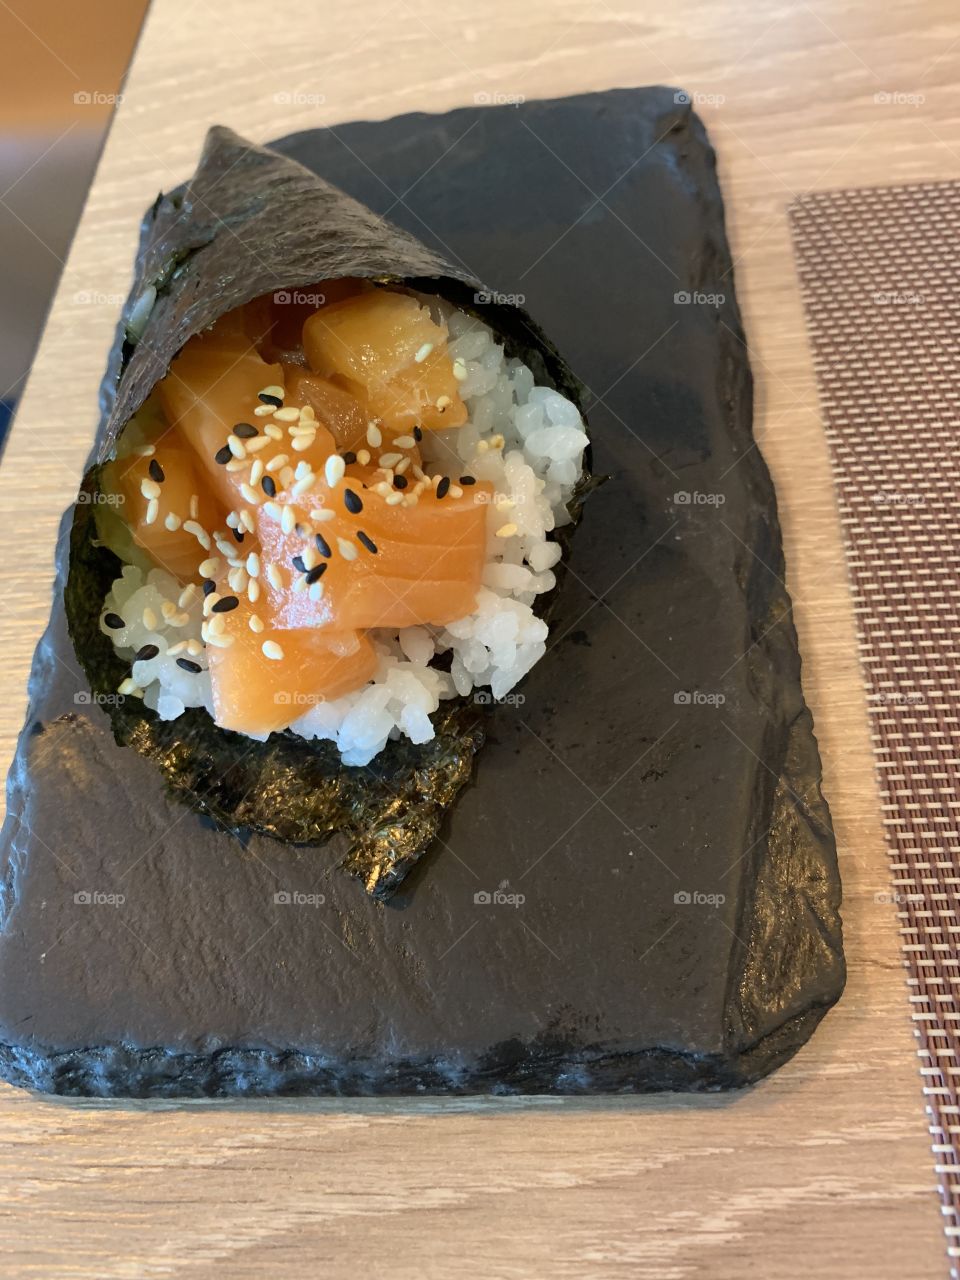 Salmon temaki on top of a stone. Very beautifully presented